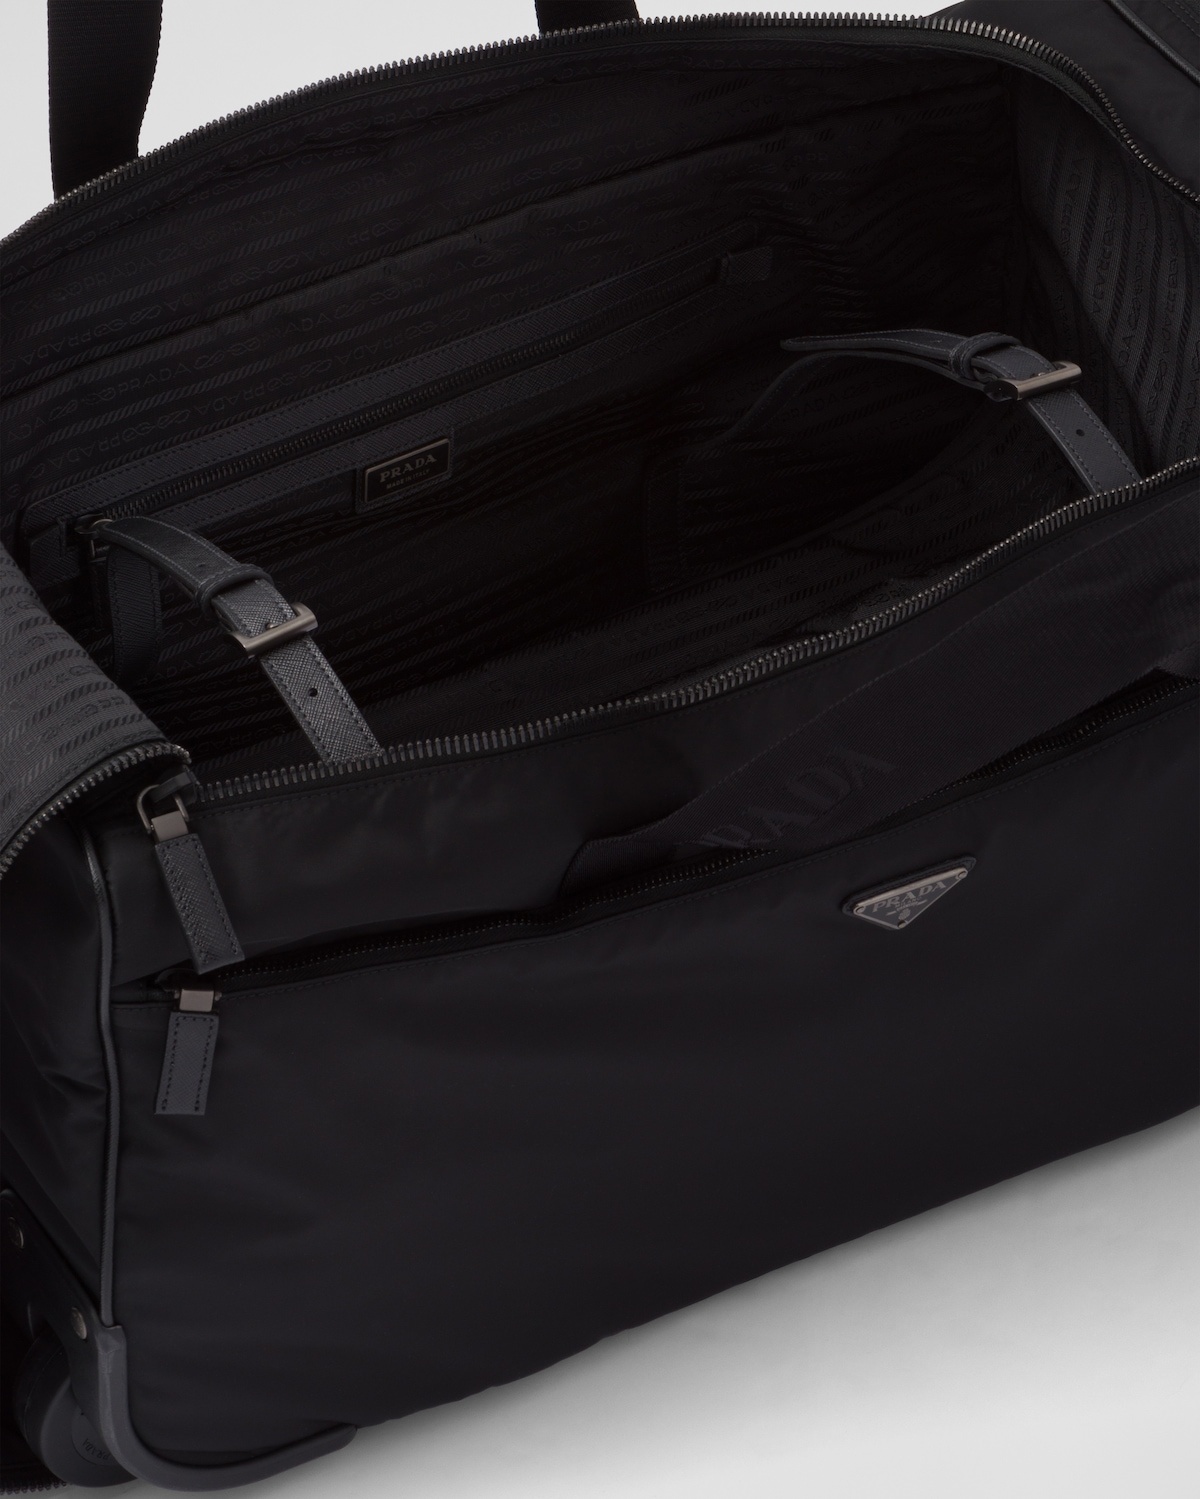 Re-Nylon and Saffiano leather trolley - 5